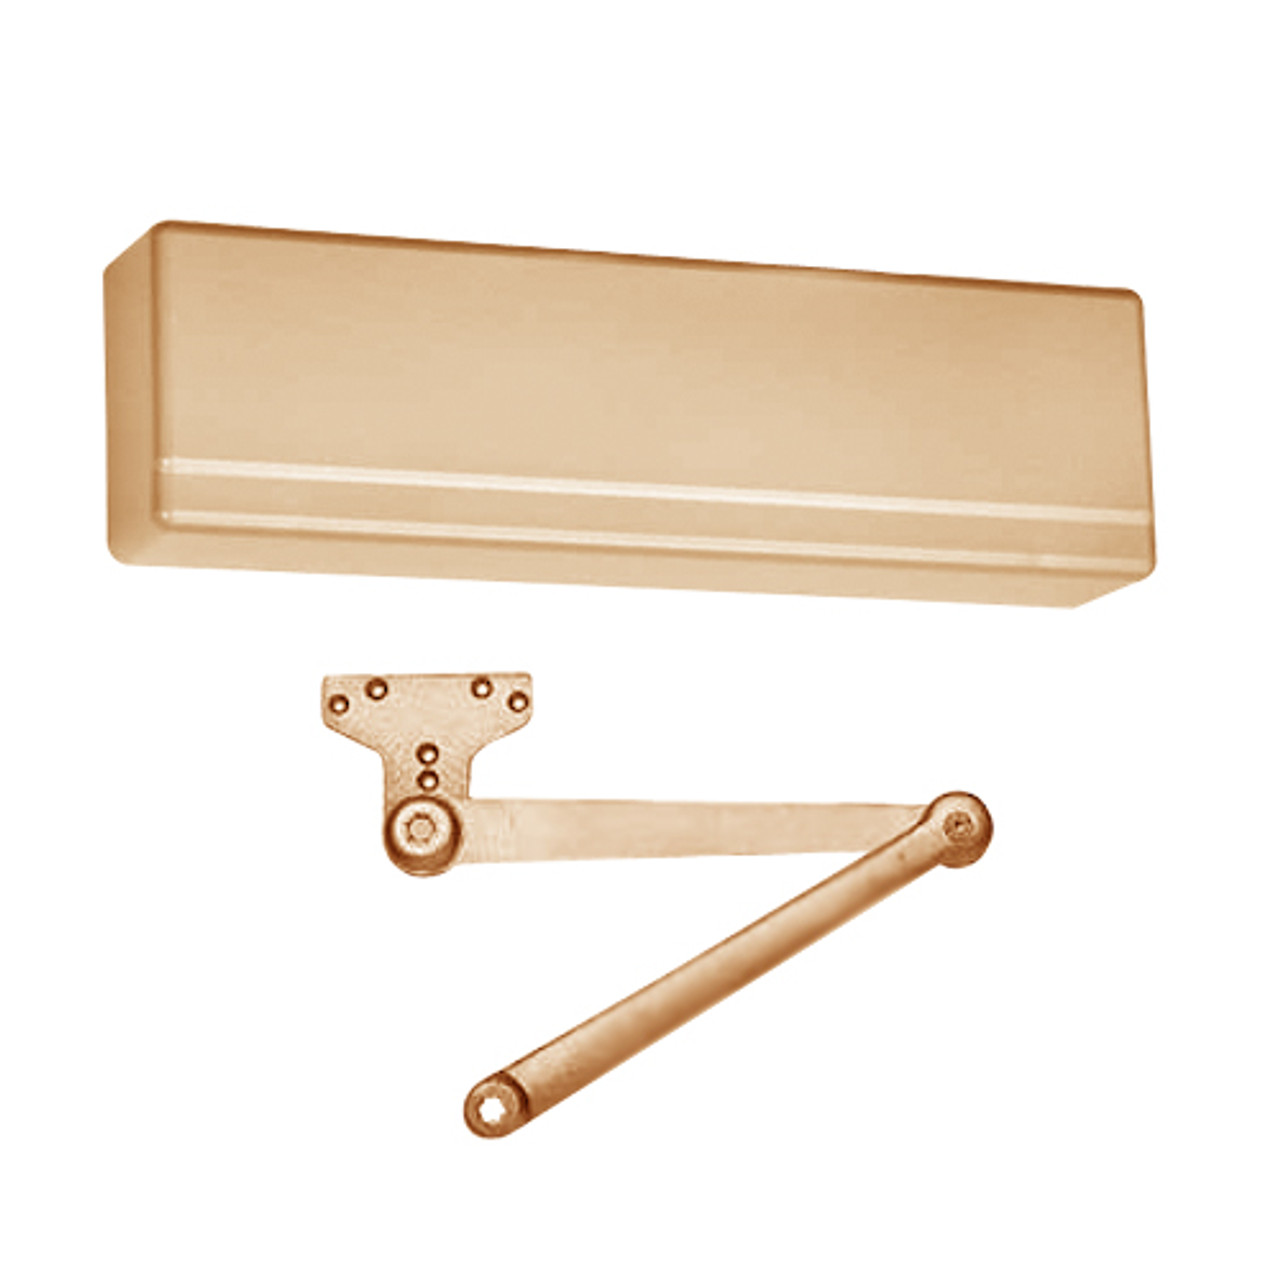 351-PH10-EP-LH Sargent 351 Series Powerglide Door Closer with Heavy Duty Friction Hold Open Parallel Arm in Satin Bronze Powder Coat